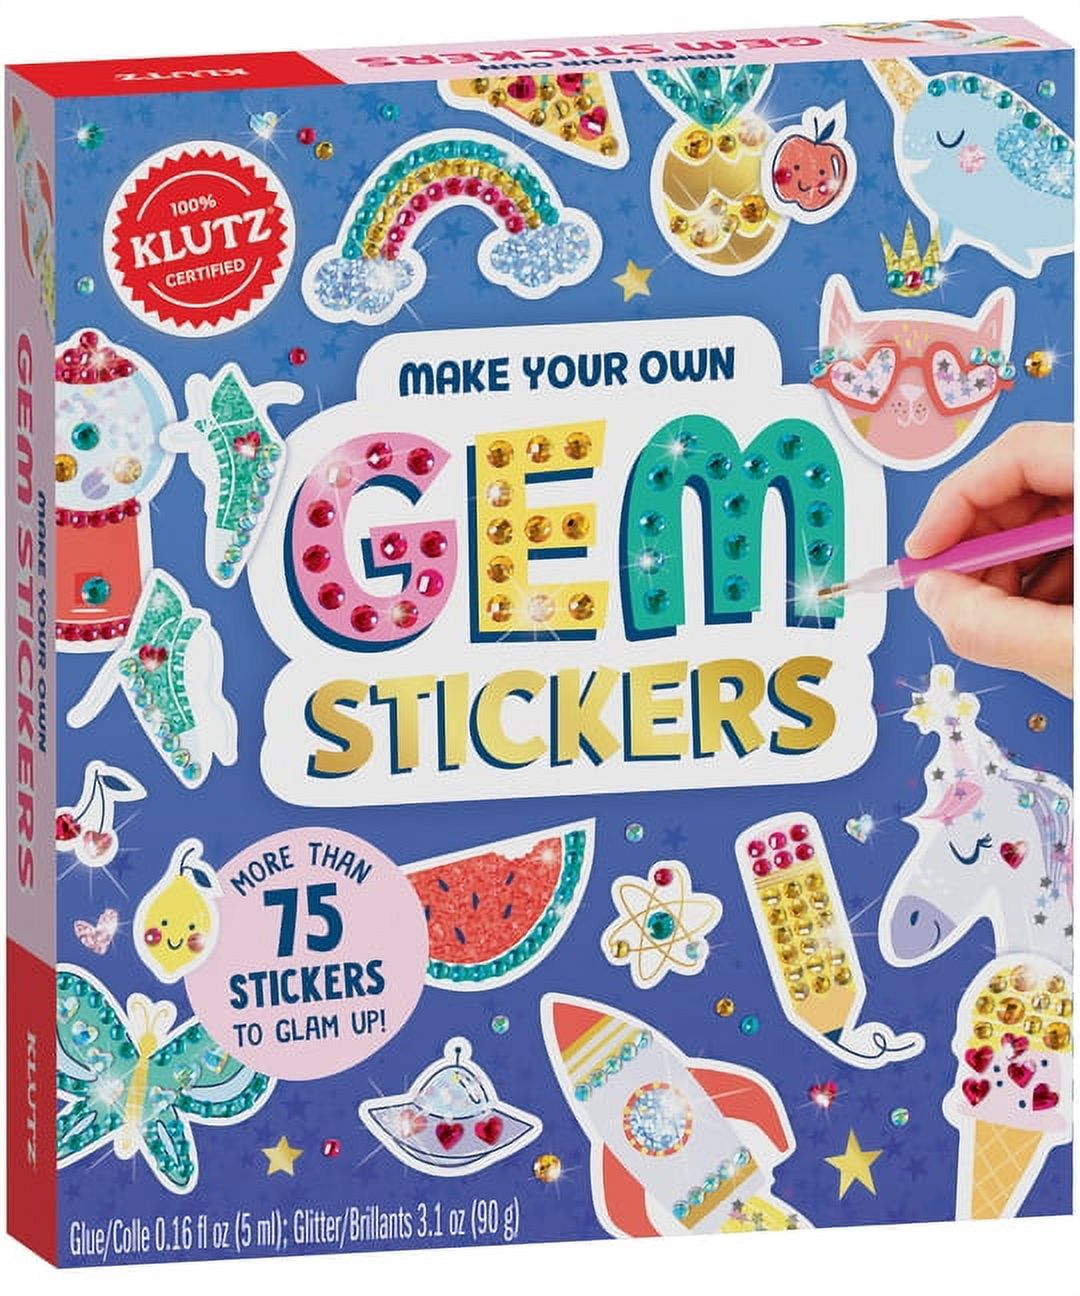 Make Your Own Gem Stickers [Book]